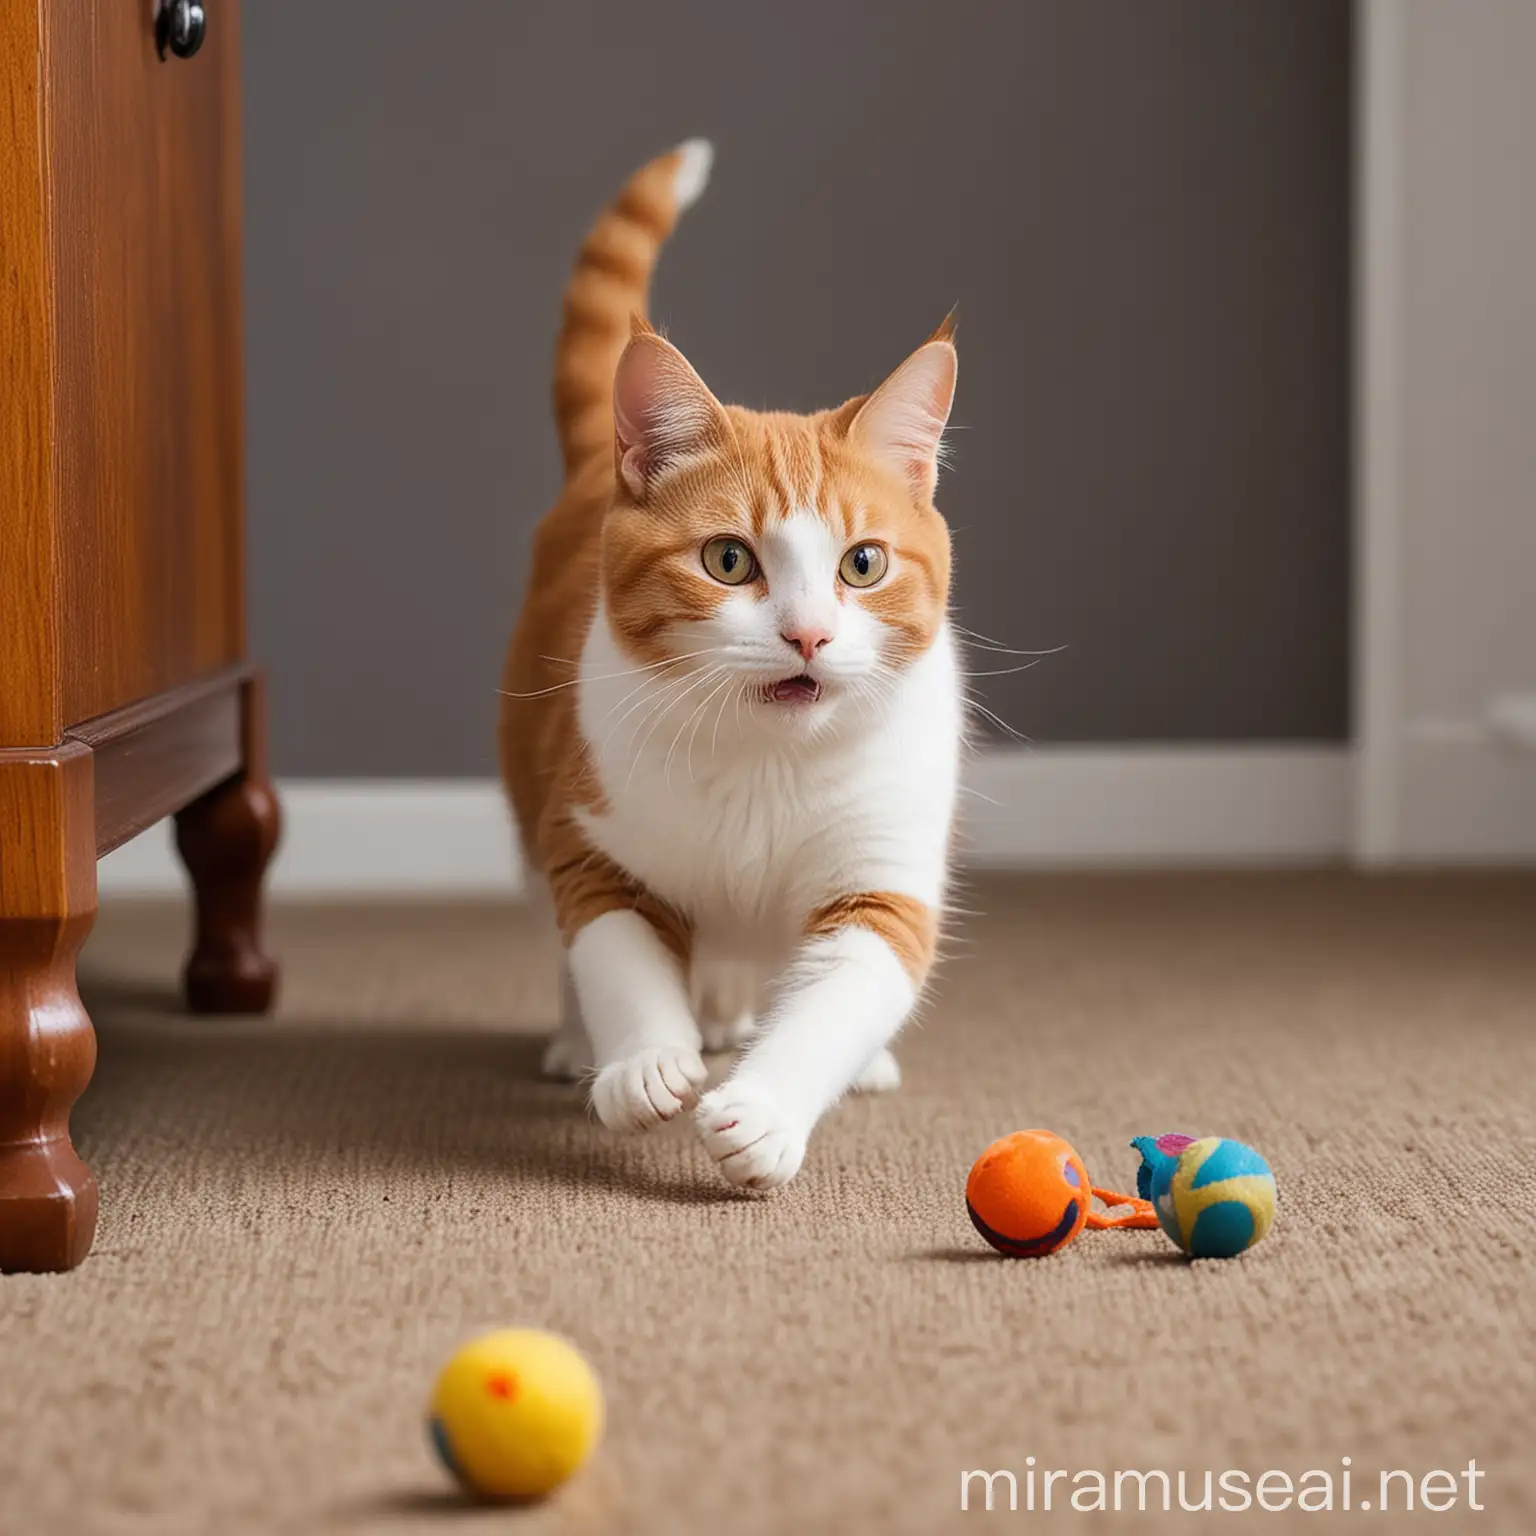 Dynamic Cat Play Exciting Action Shots of Playful Cats Chasing Toys and Pouncing